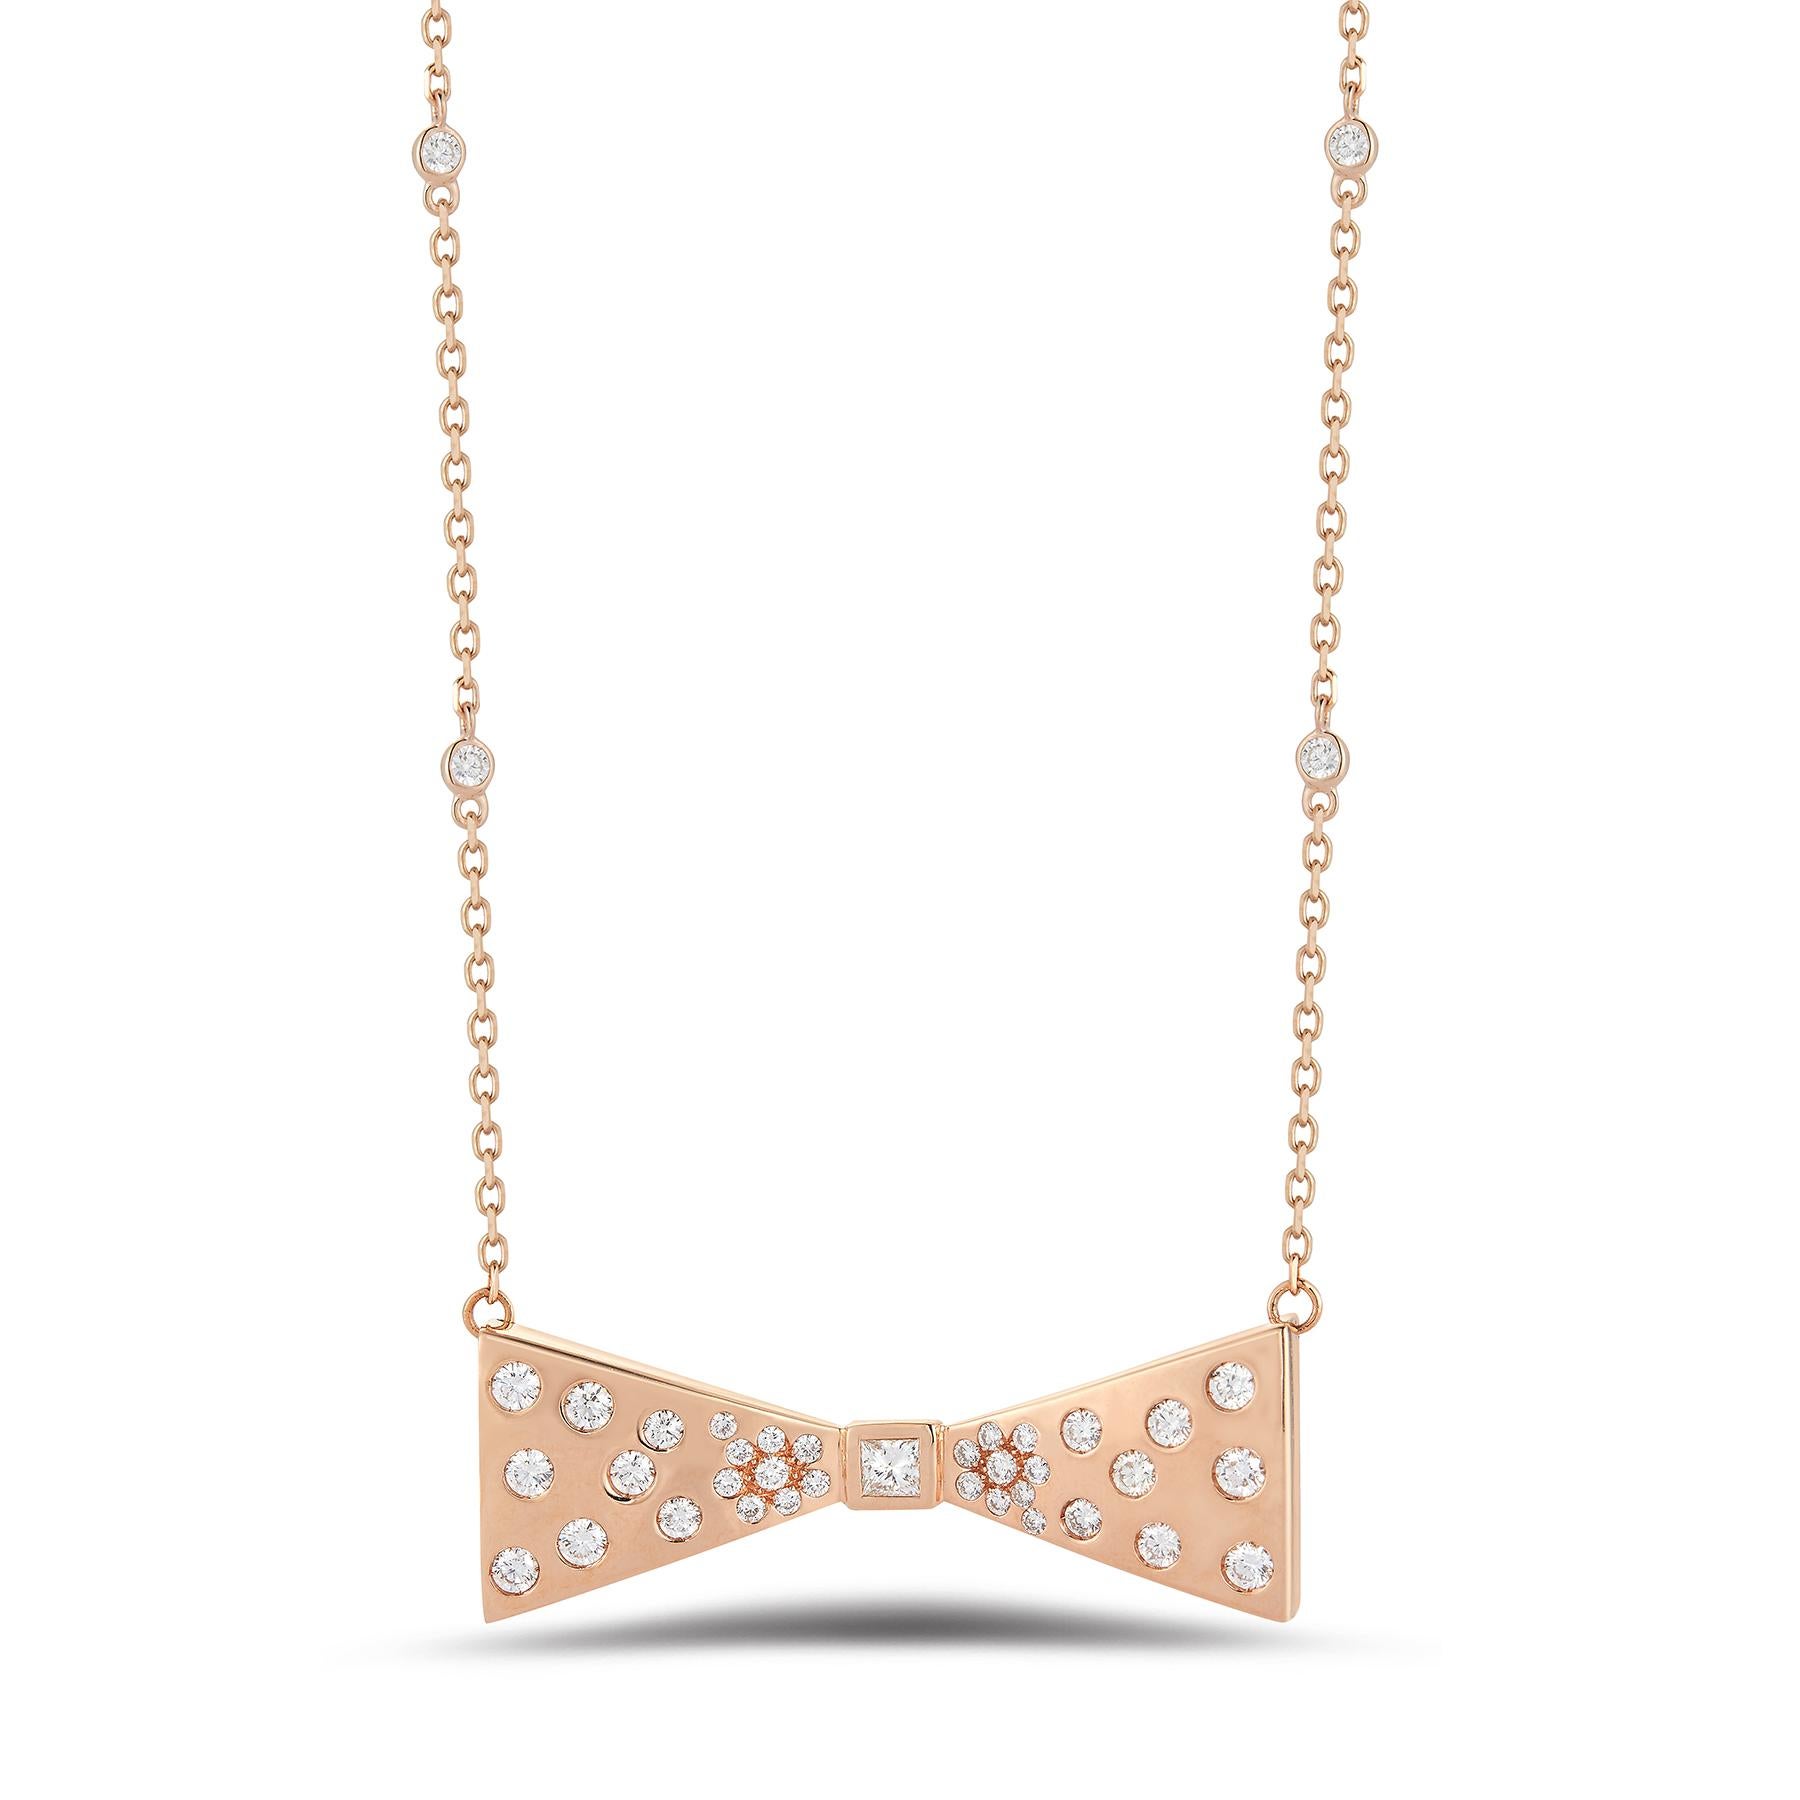 Beautiful 18K Pink Gold Necklace, its chain dotted with Diamonds and displaying a charming Diamond-embellished Bow with a Flawless Princess-cut center stone. 